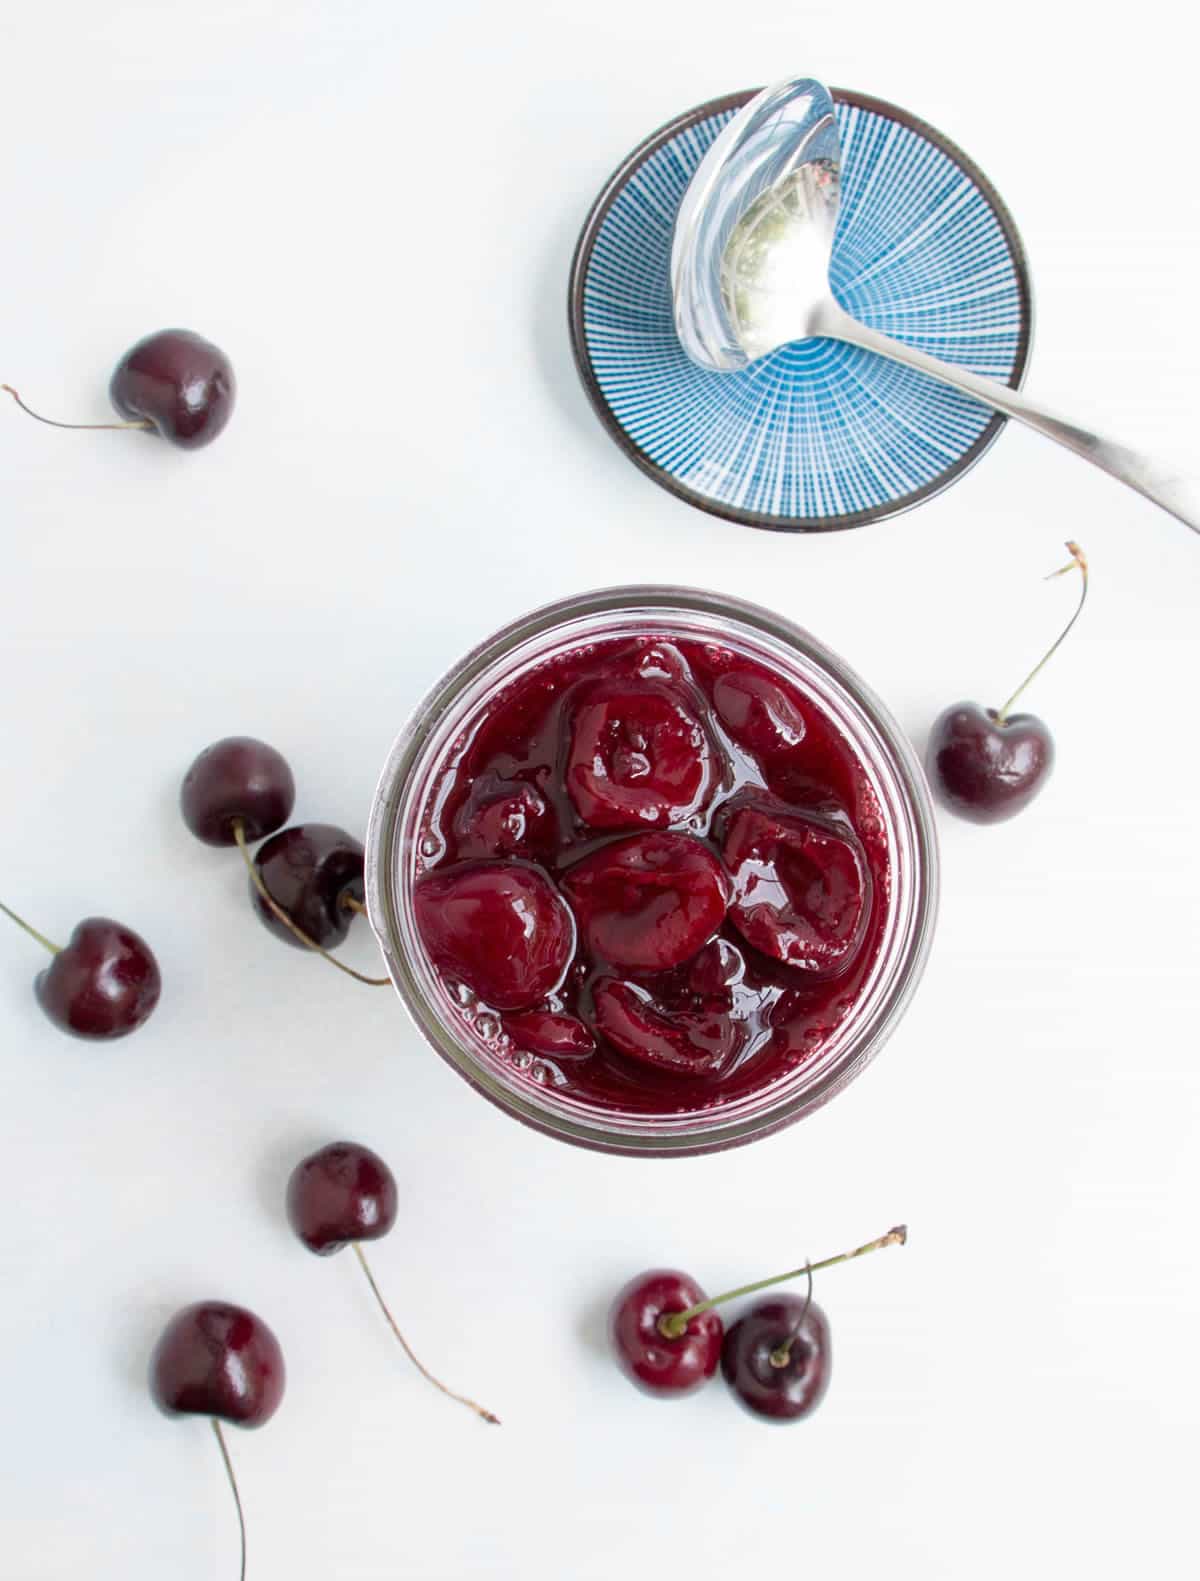 Fresh Sweet Cherry Sauce. An easy one pan sauce, made with fresh cherries and citrus. Delicious warm or cold on top of sweet or savory dishes!